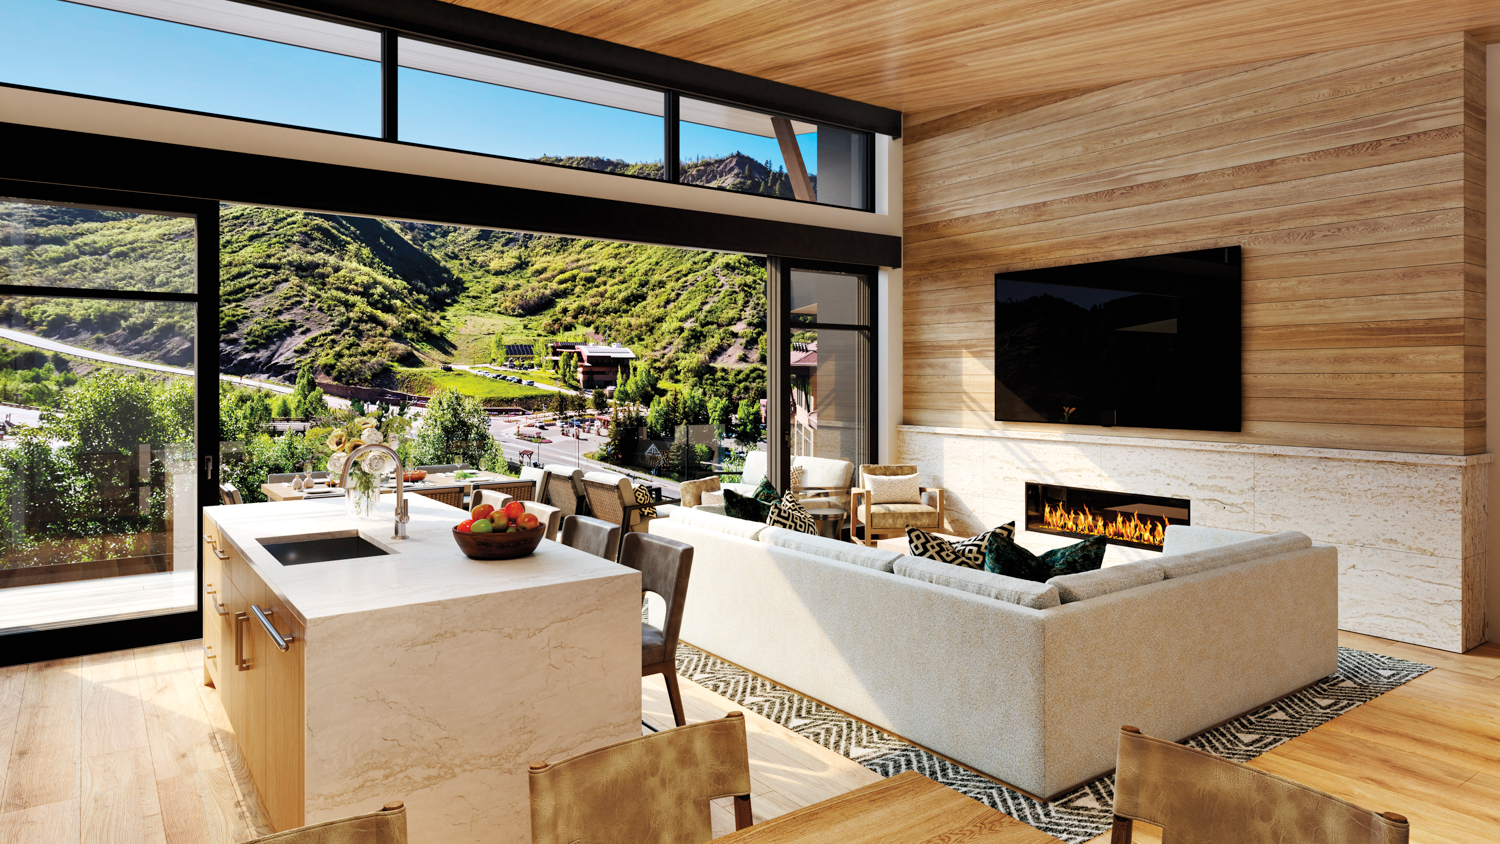 Cirque x Viceroy living room with panoramic mountain views seen through a window wall that opens onto a patio